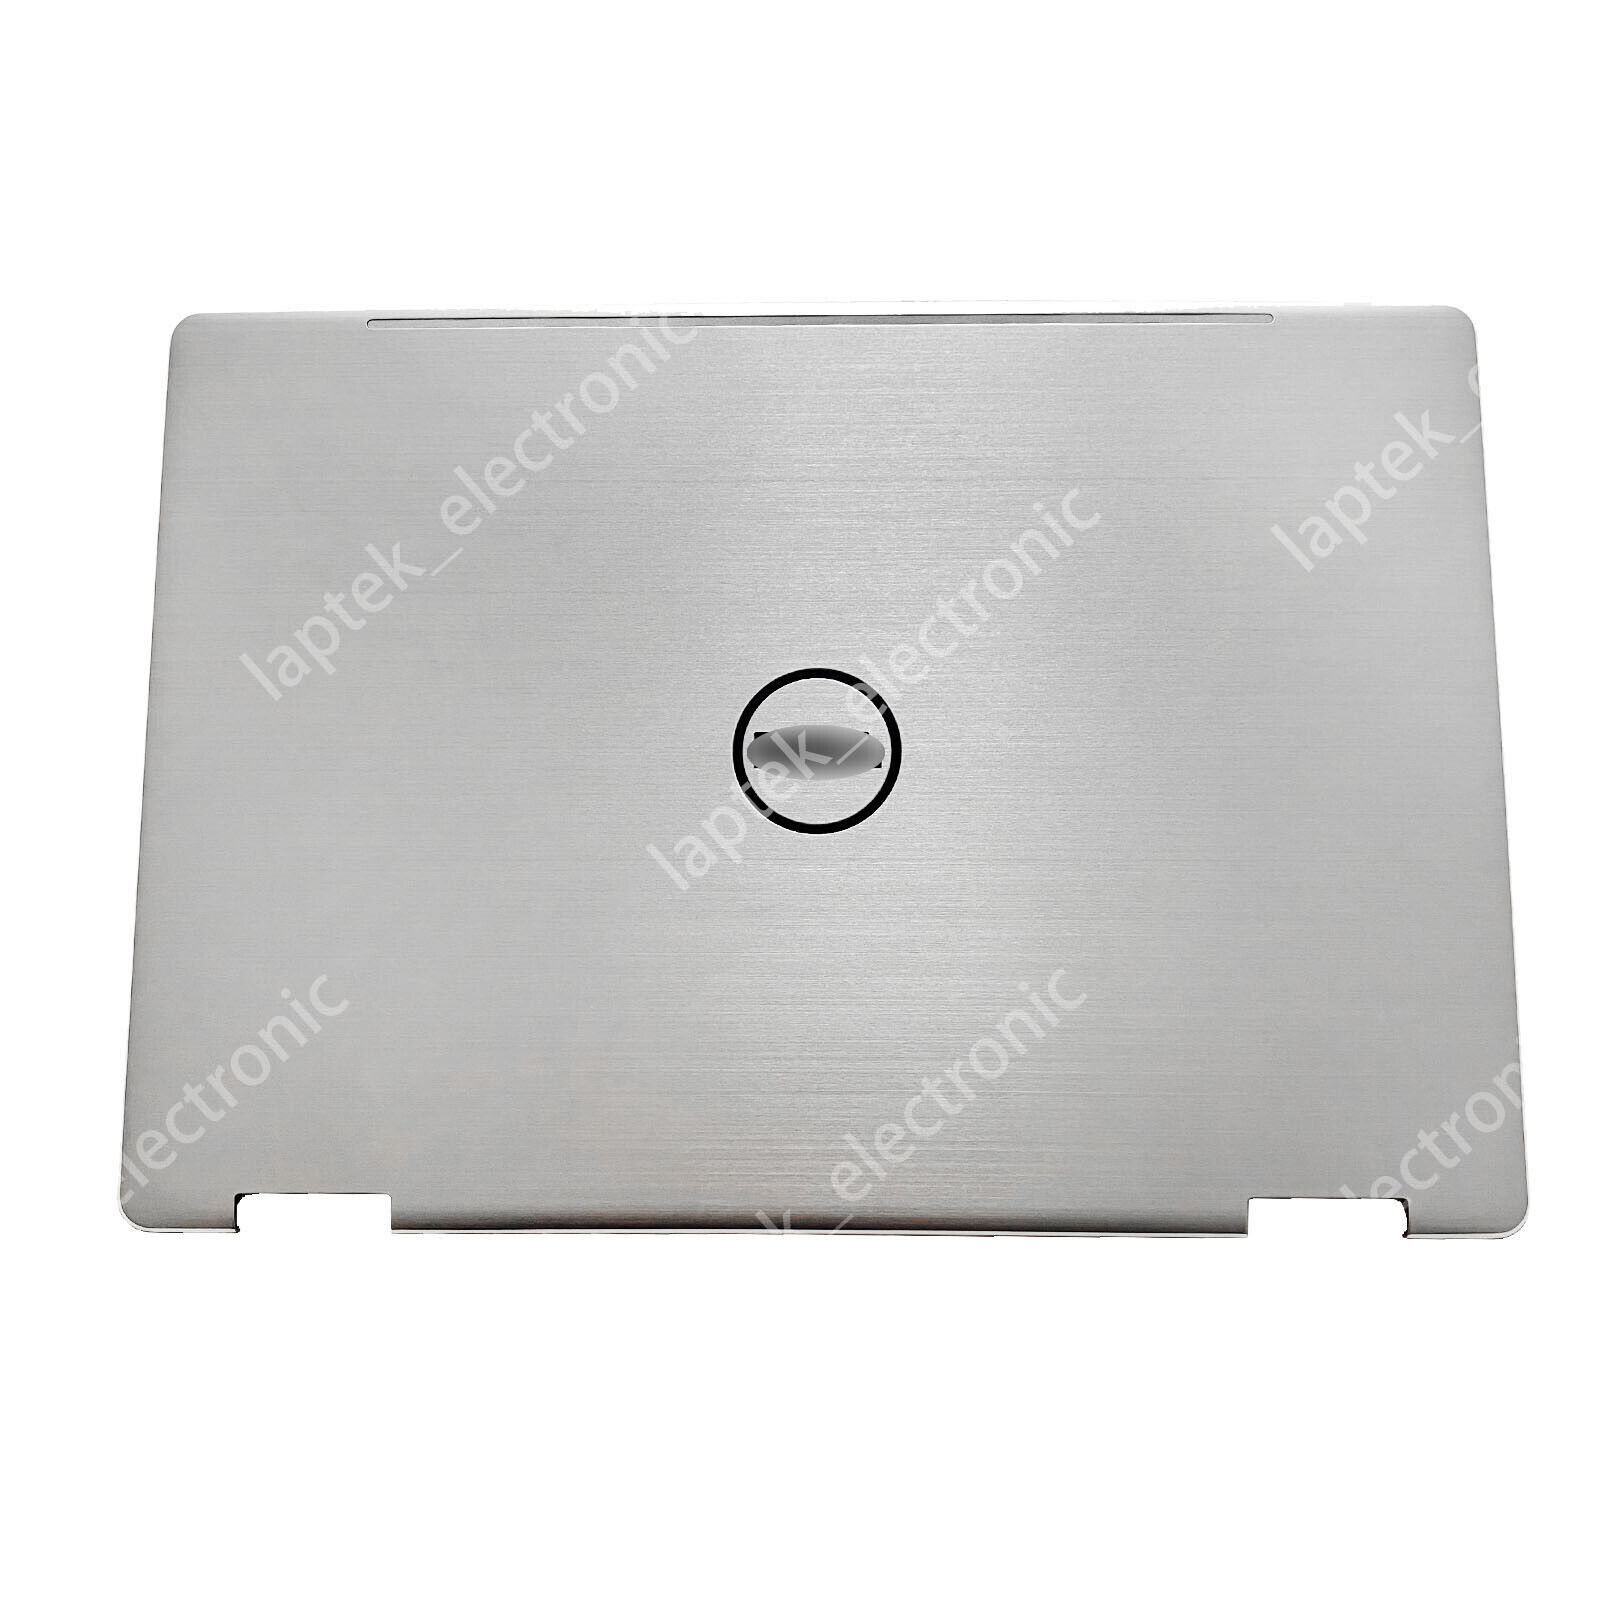 New For Dell Inspiron 13 7368 7378 Lcd Back Cover Rear Case Top Lid 7531M Silver